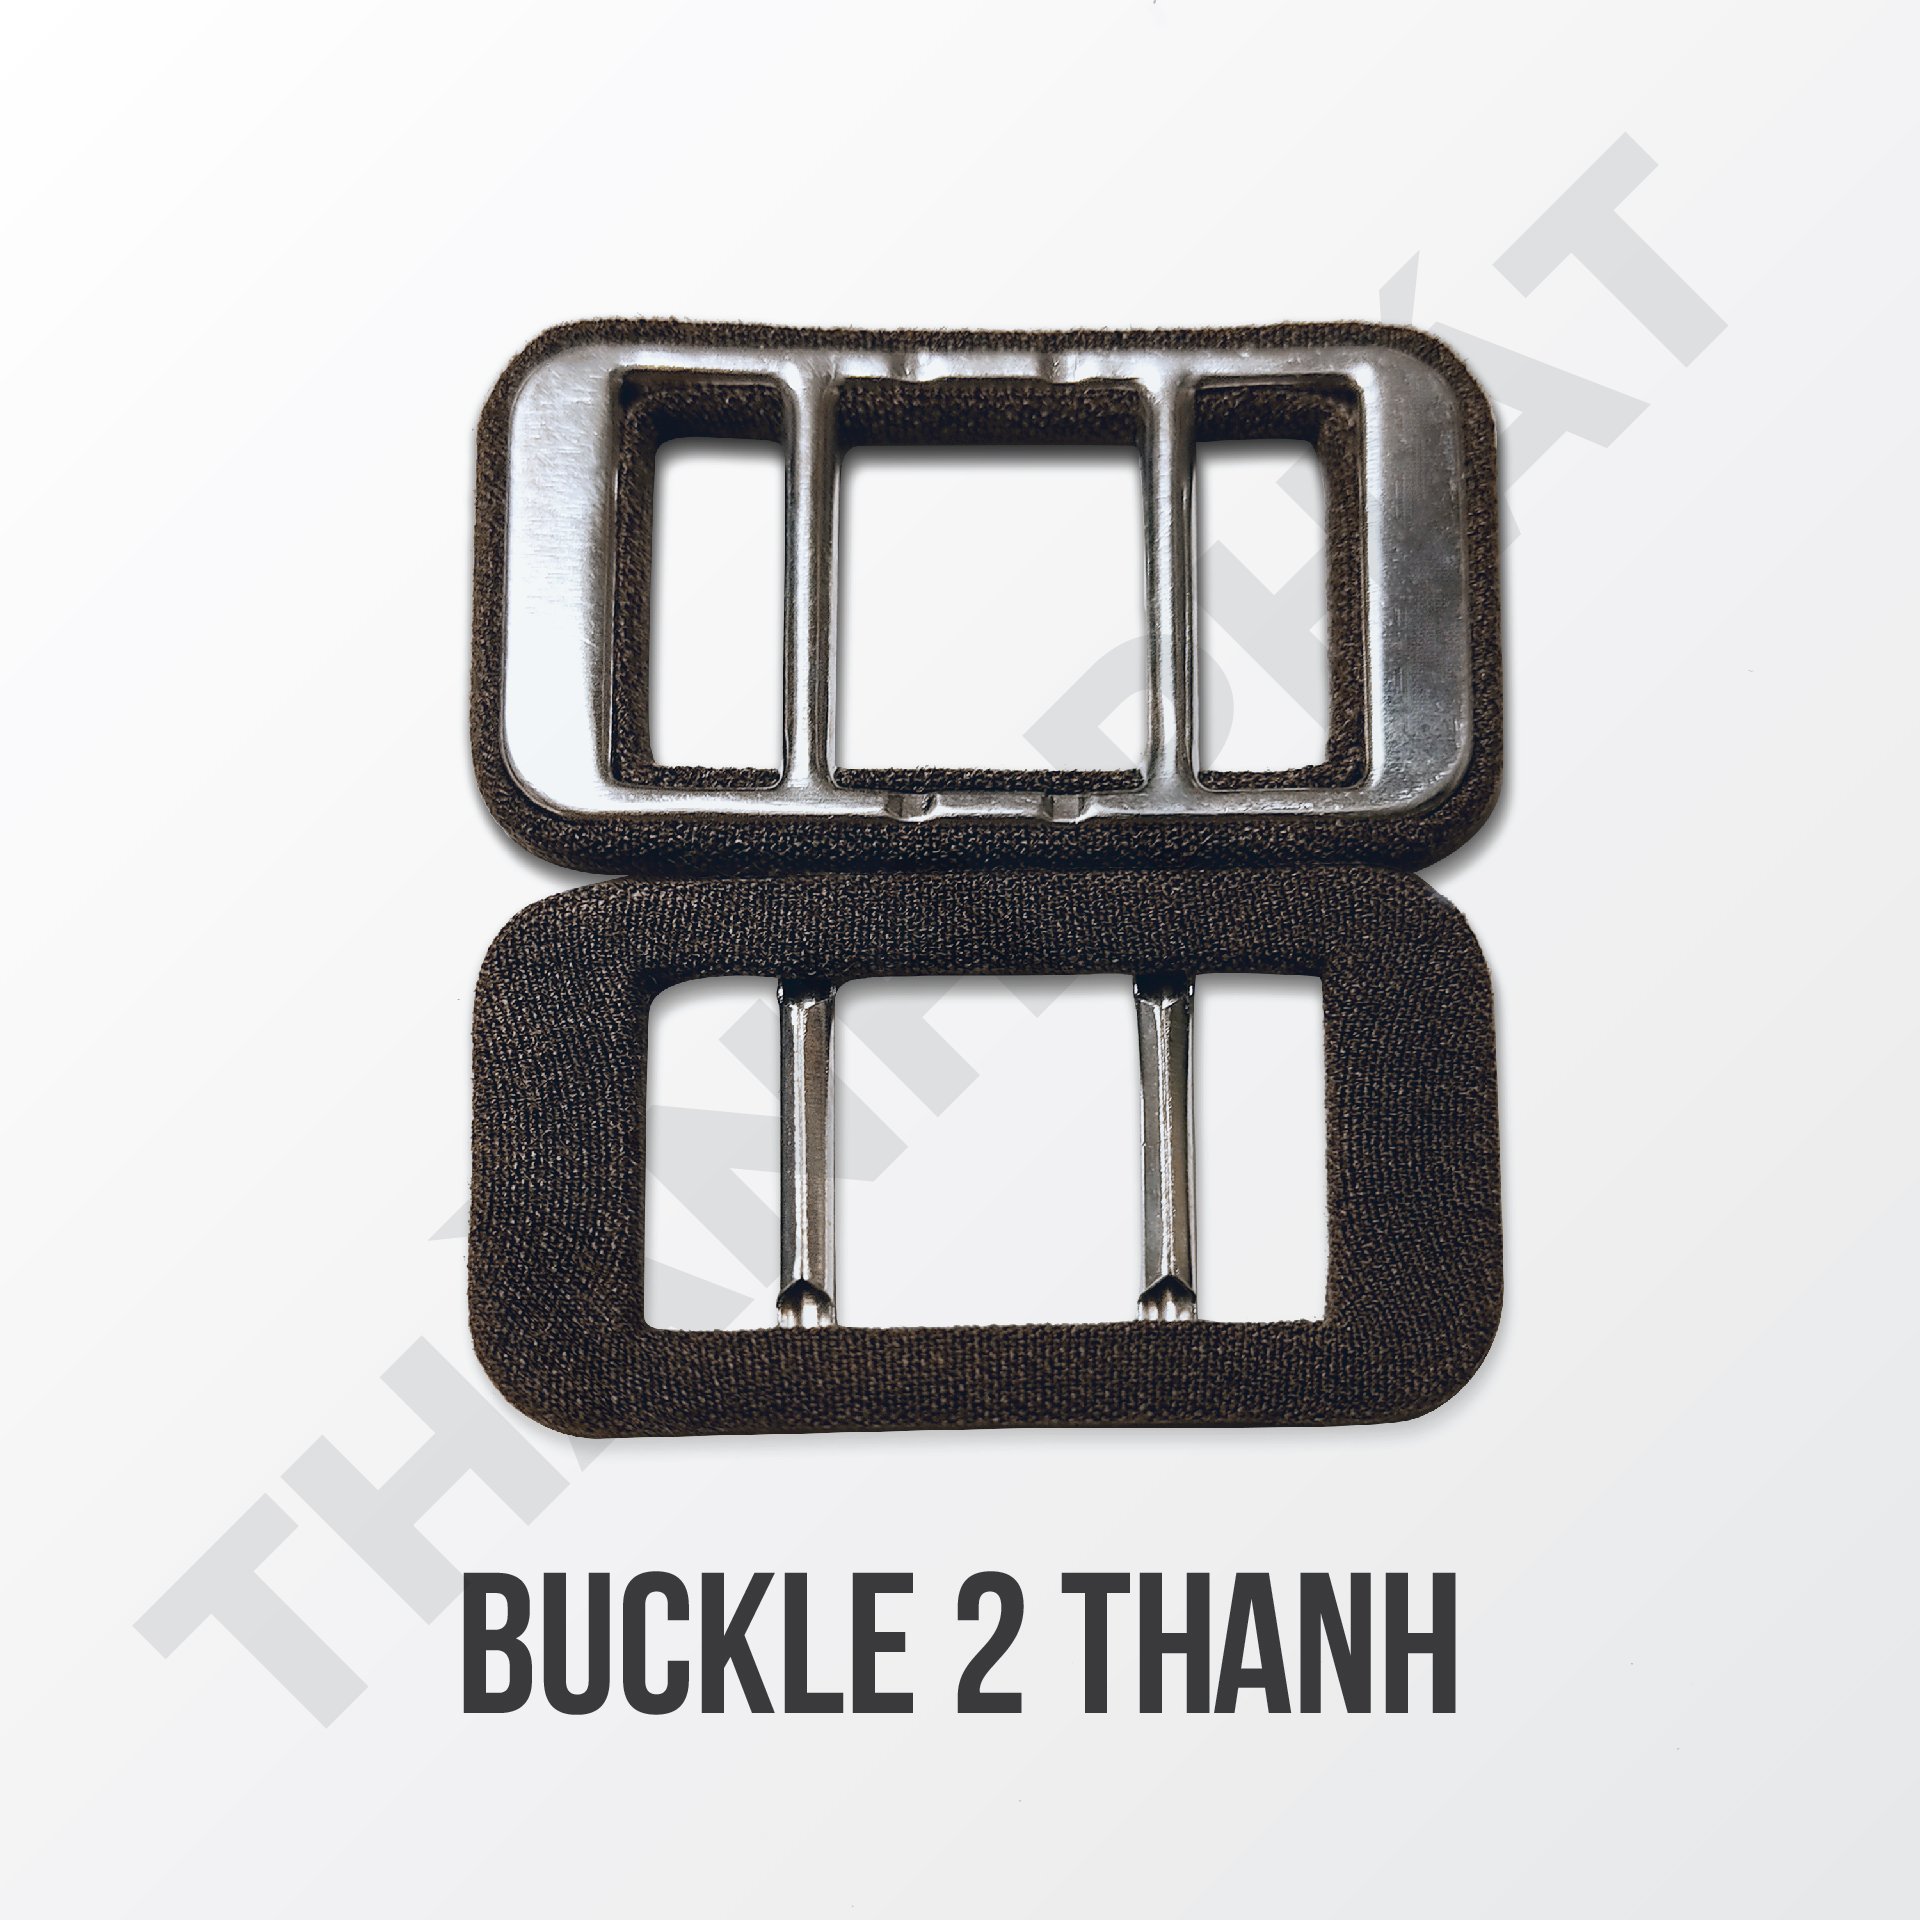 Buckle 2 Thanh